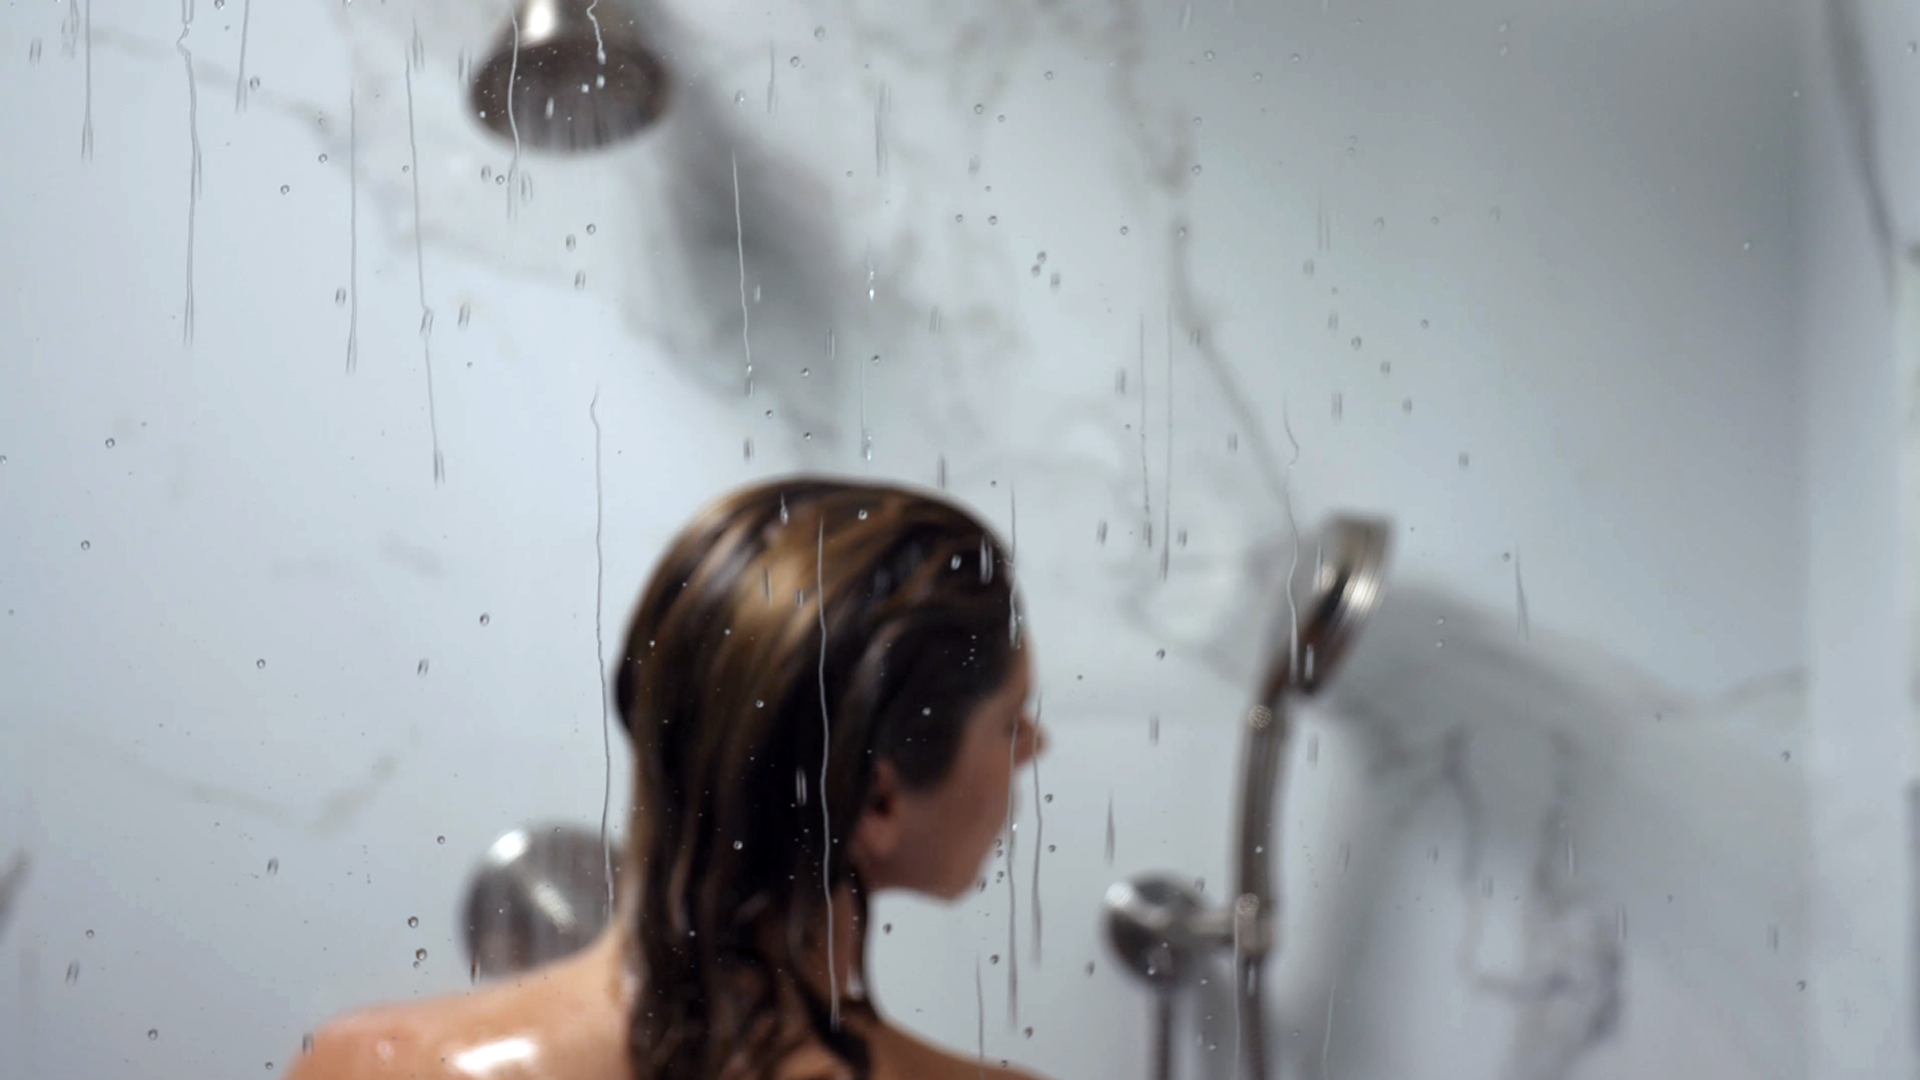 Water Beads on Shower Glass with Woman in Background